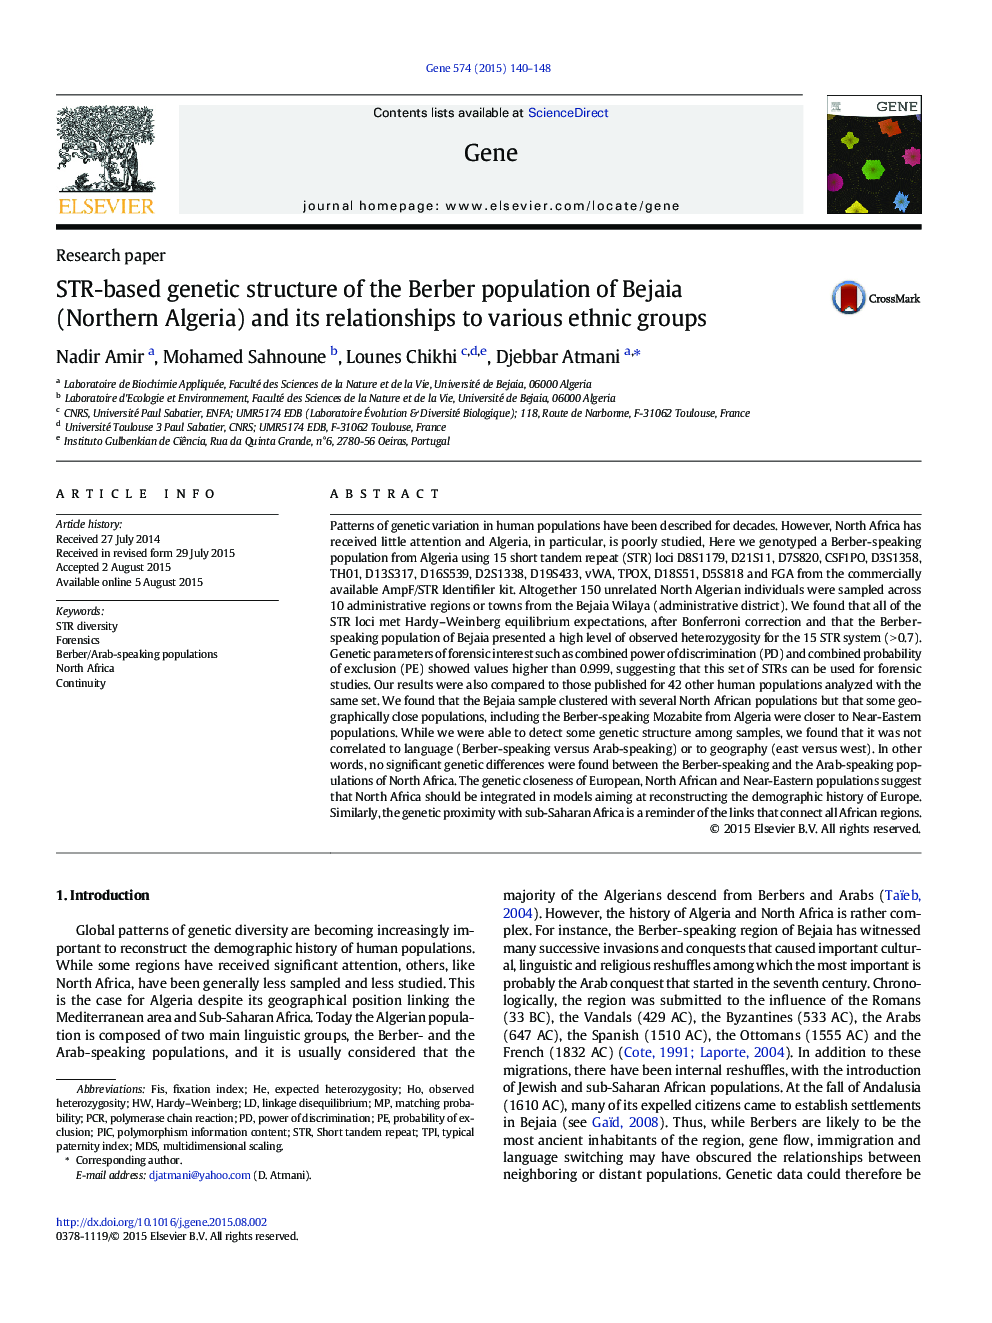 STR-based genetic structure of the Berber population of Bejaia (Northern Algeria) and its relationships to various ethnic groups